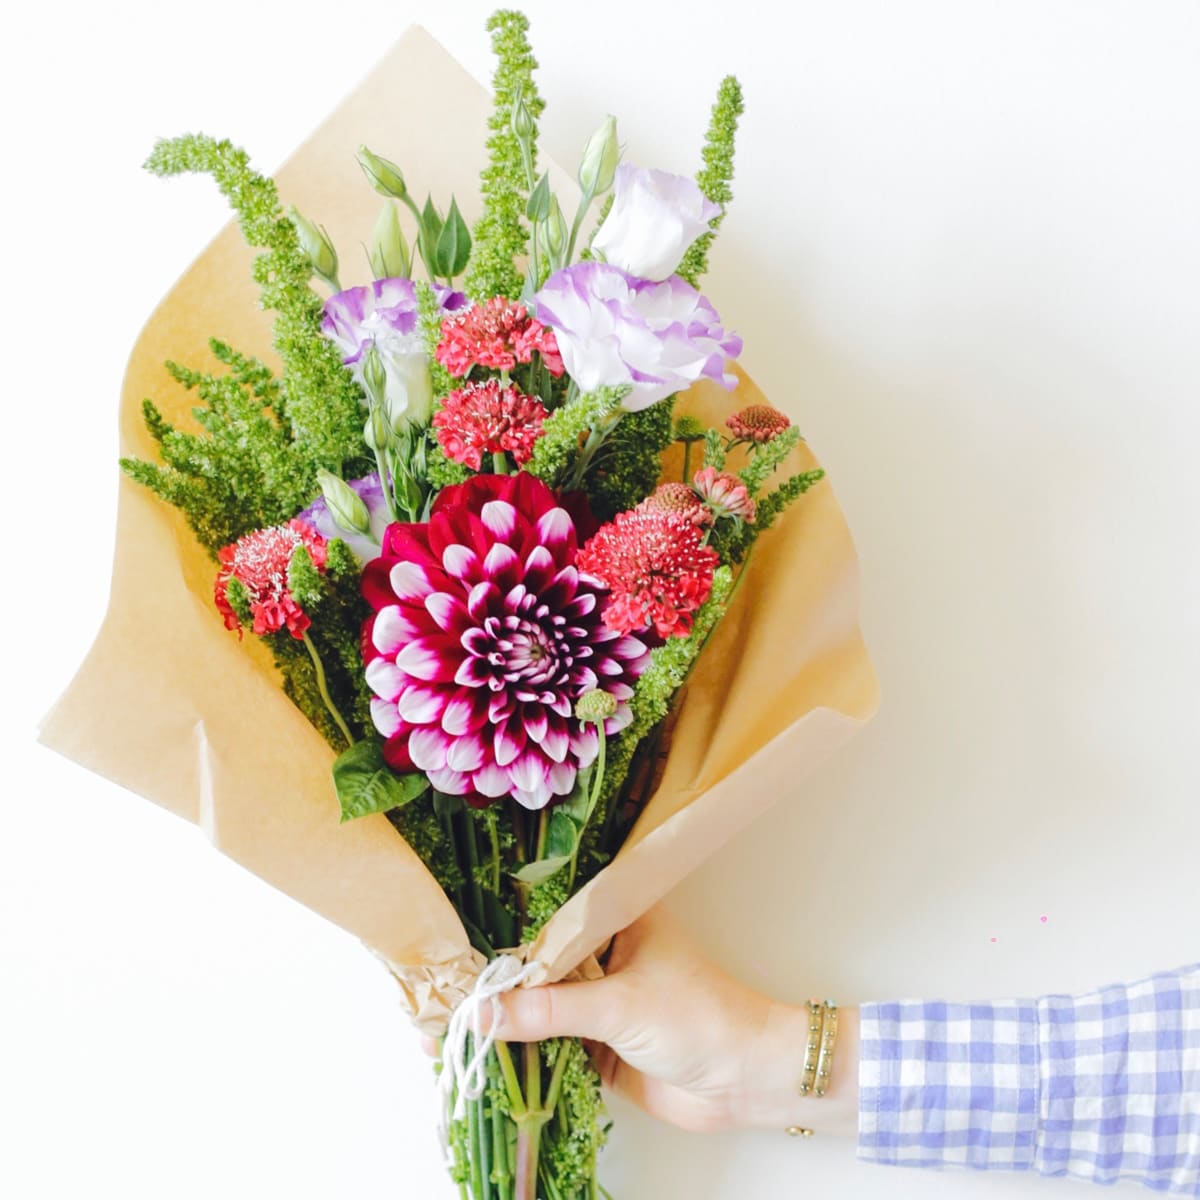 A hand holding a paper-wrapped colourful bouquet announces the flower subscription product category.